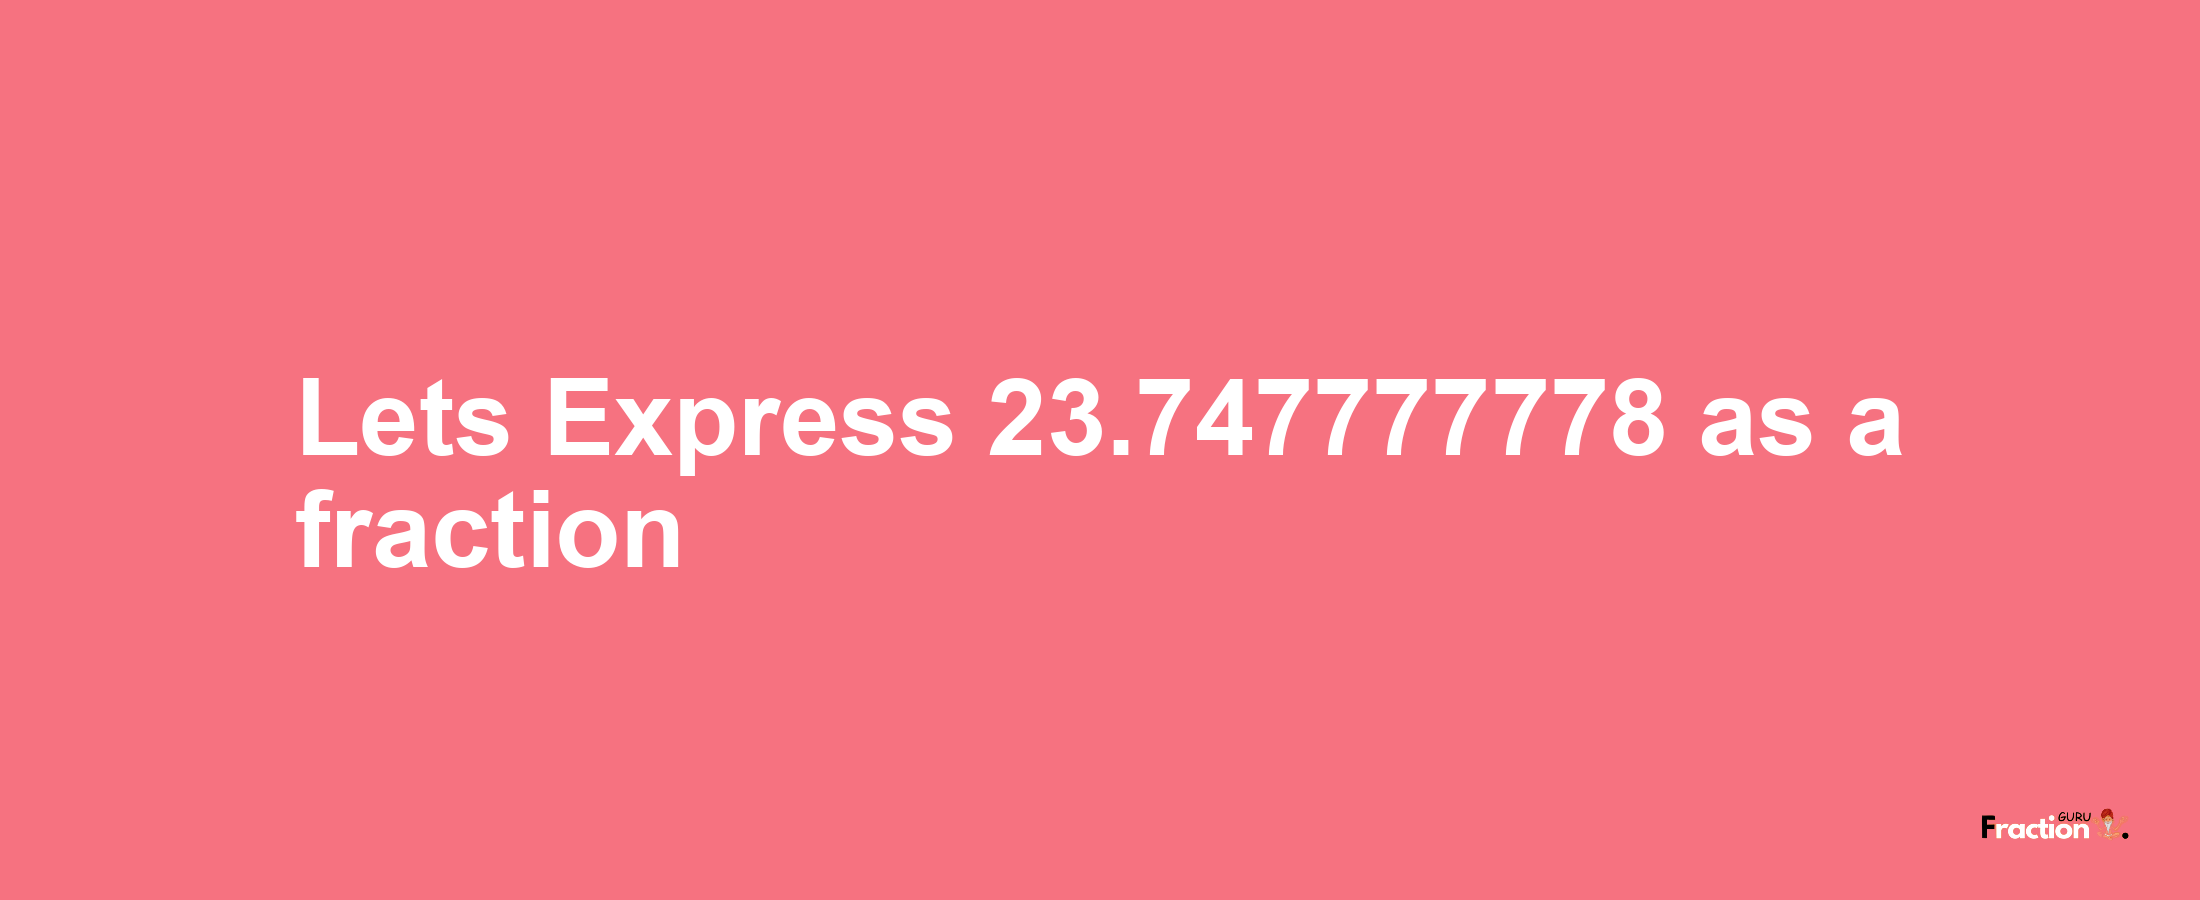 Lets Express 23.747777778 as afraction